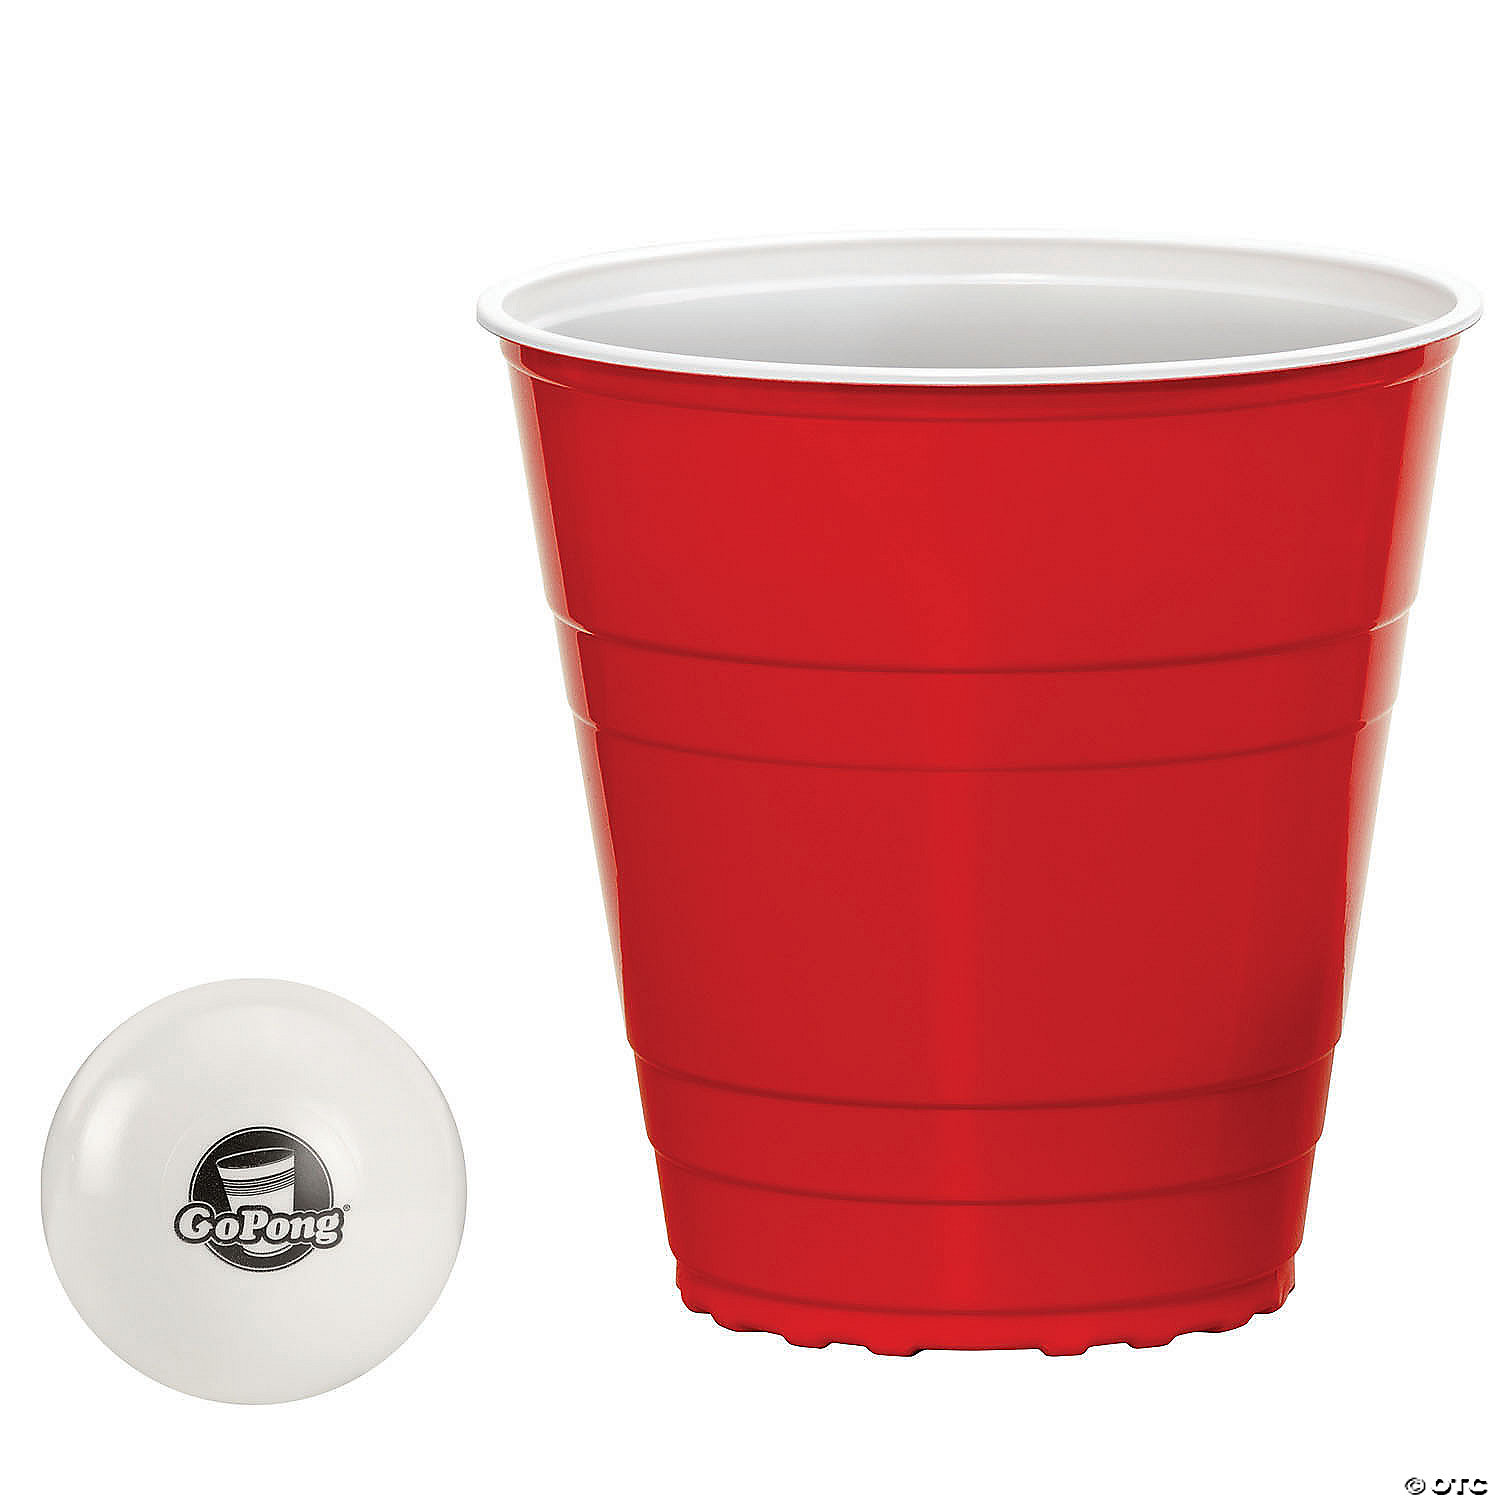 https://s7.orientaltrading.com/is/image/OrientalTrading/VIEWER_ZOOM/gopong-110oz-giant-red-party-cups-24-pack~14097616